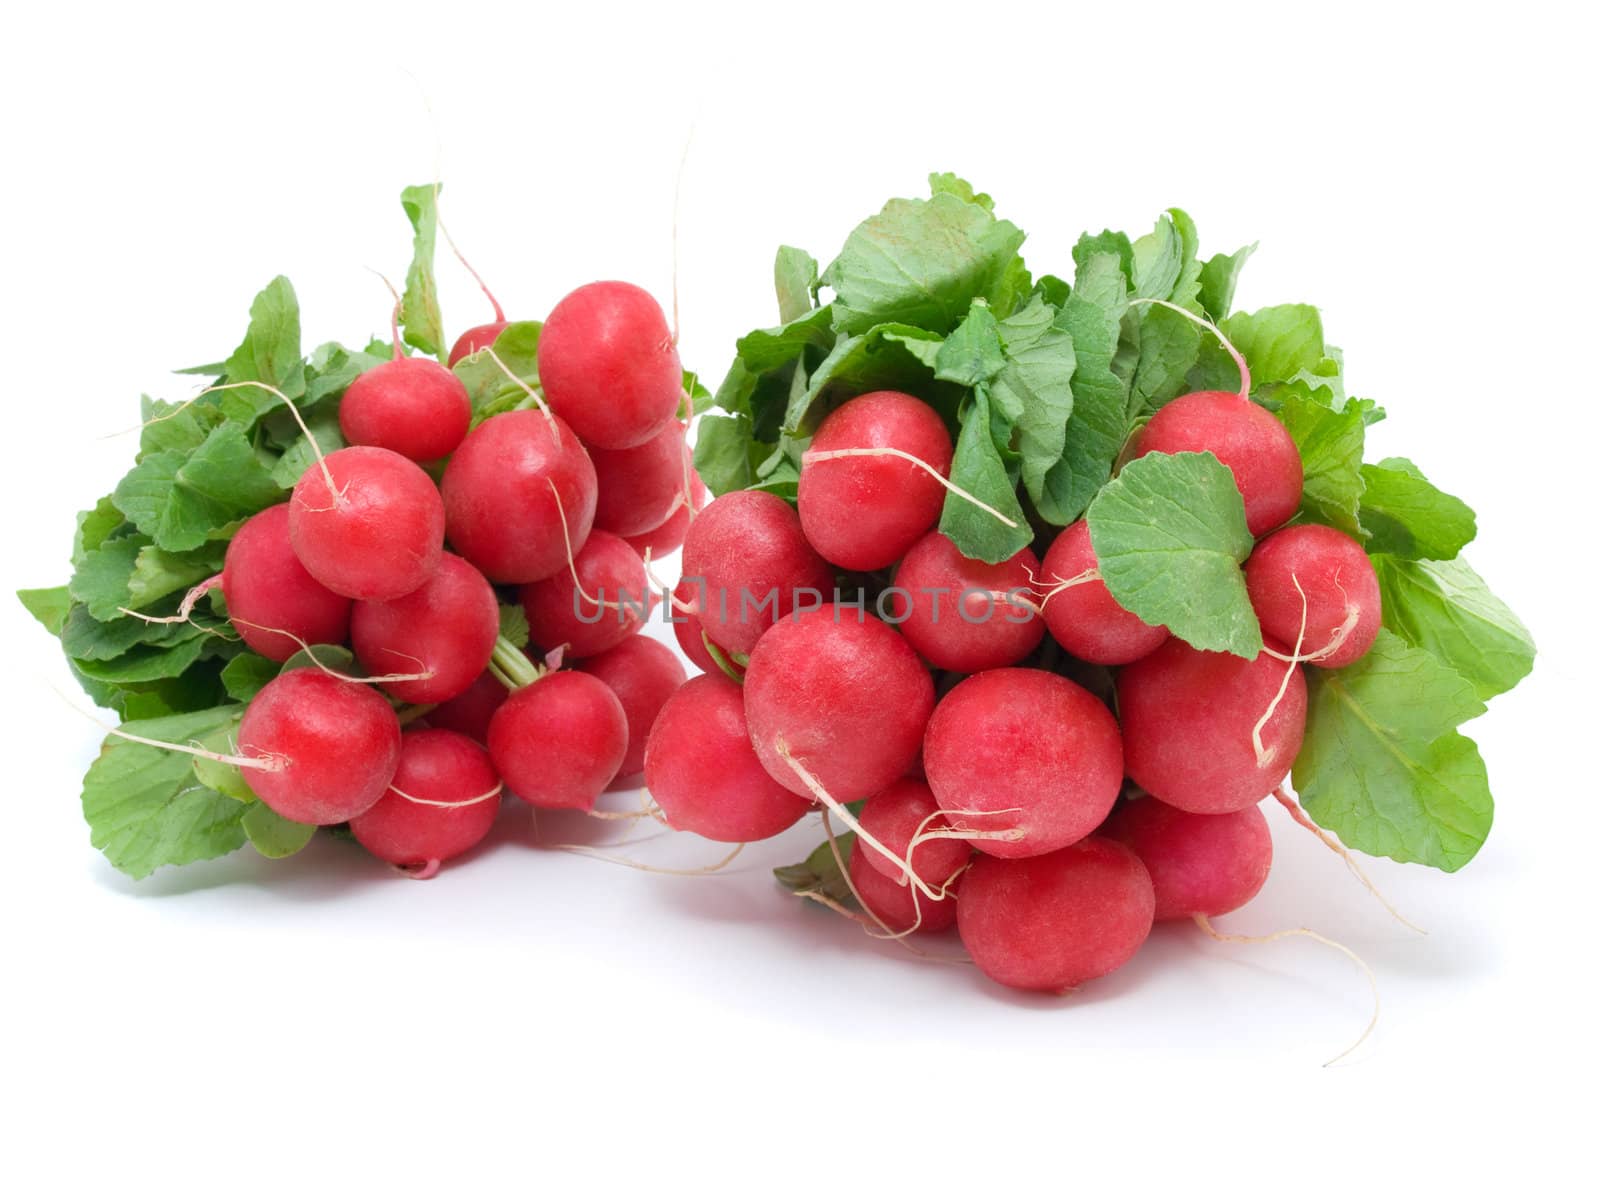 two bunch of radishes   by motorolka